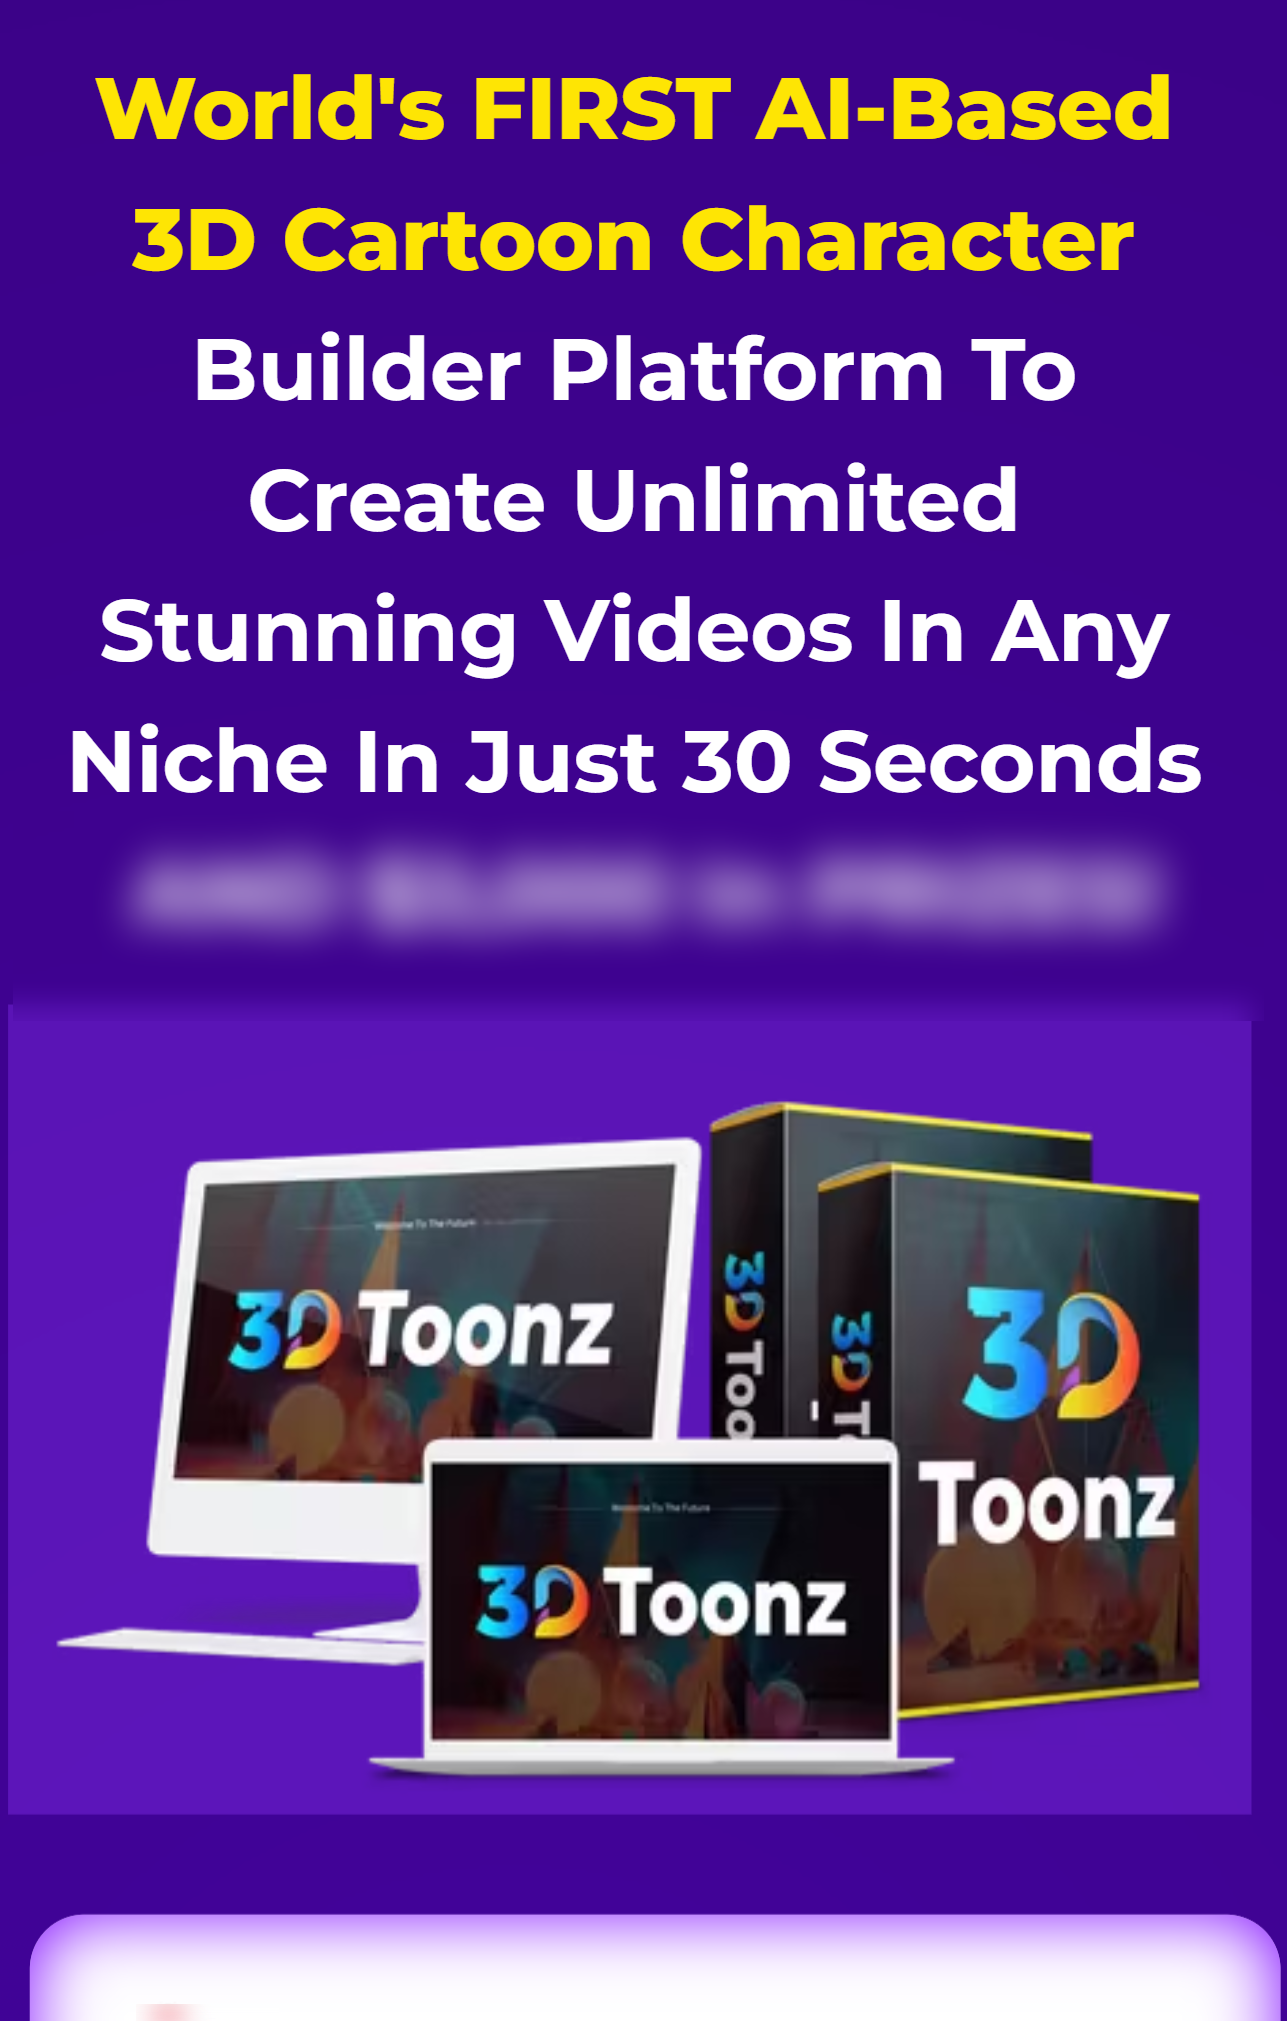 3D Toonz JV Page 3D Toonz Review: Should You Get It Or Not? - AI-Based 3D Cartoon Character Builder Platform To Create Unlimited Stunning Videos In Any Niche In Just 30 Seconds